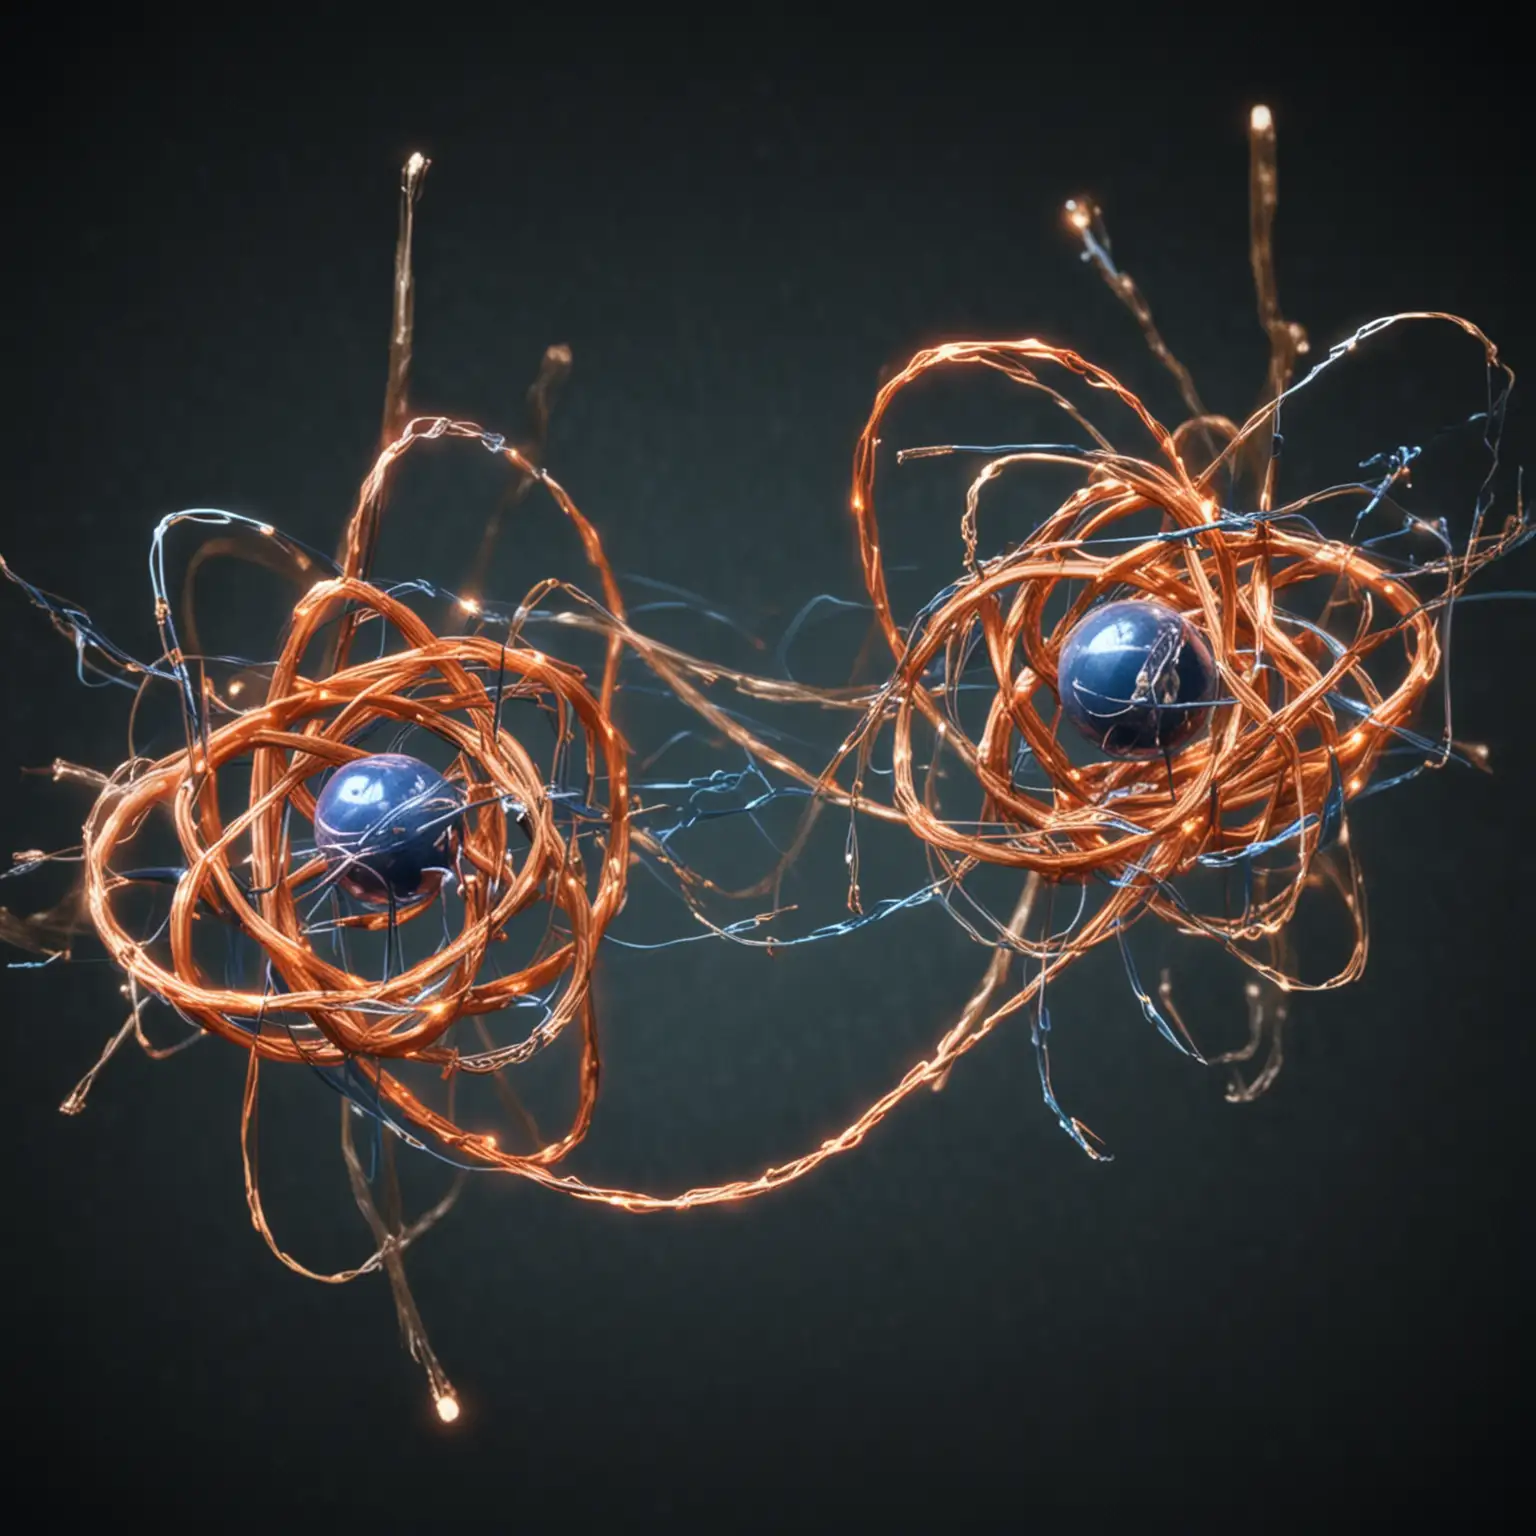 A pair of entangled electrons